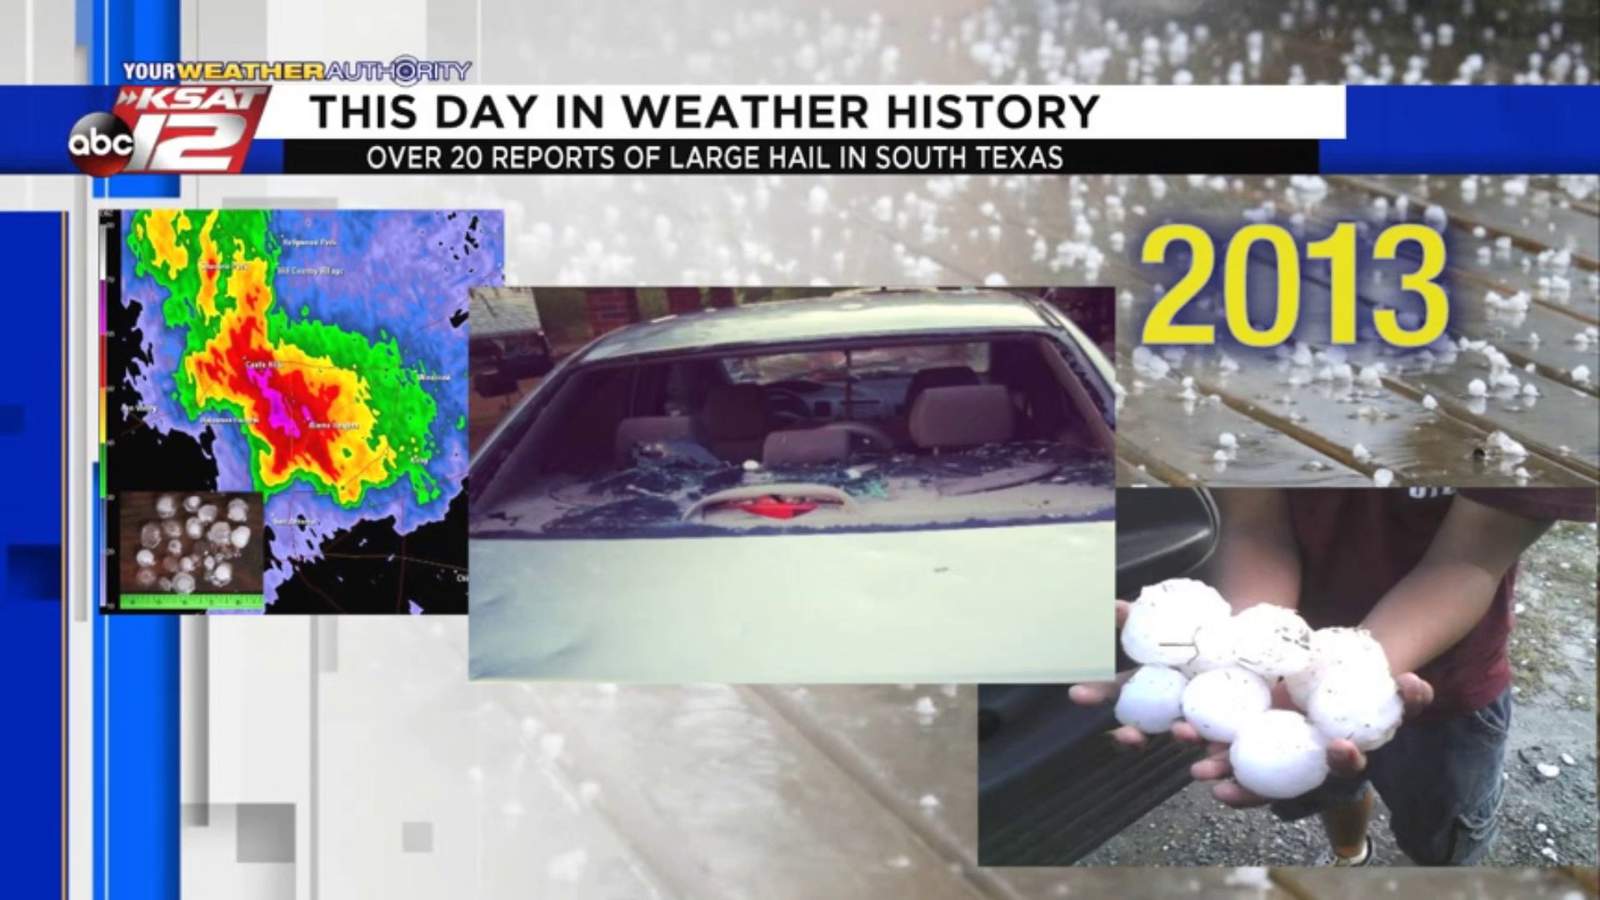 This Day in Weather History: March 31st